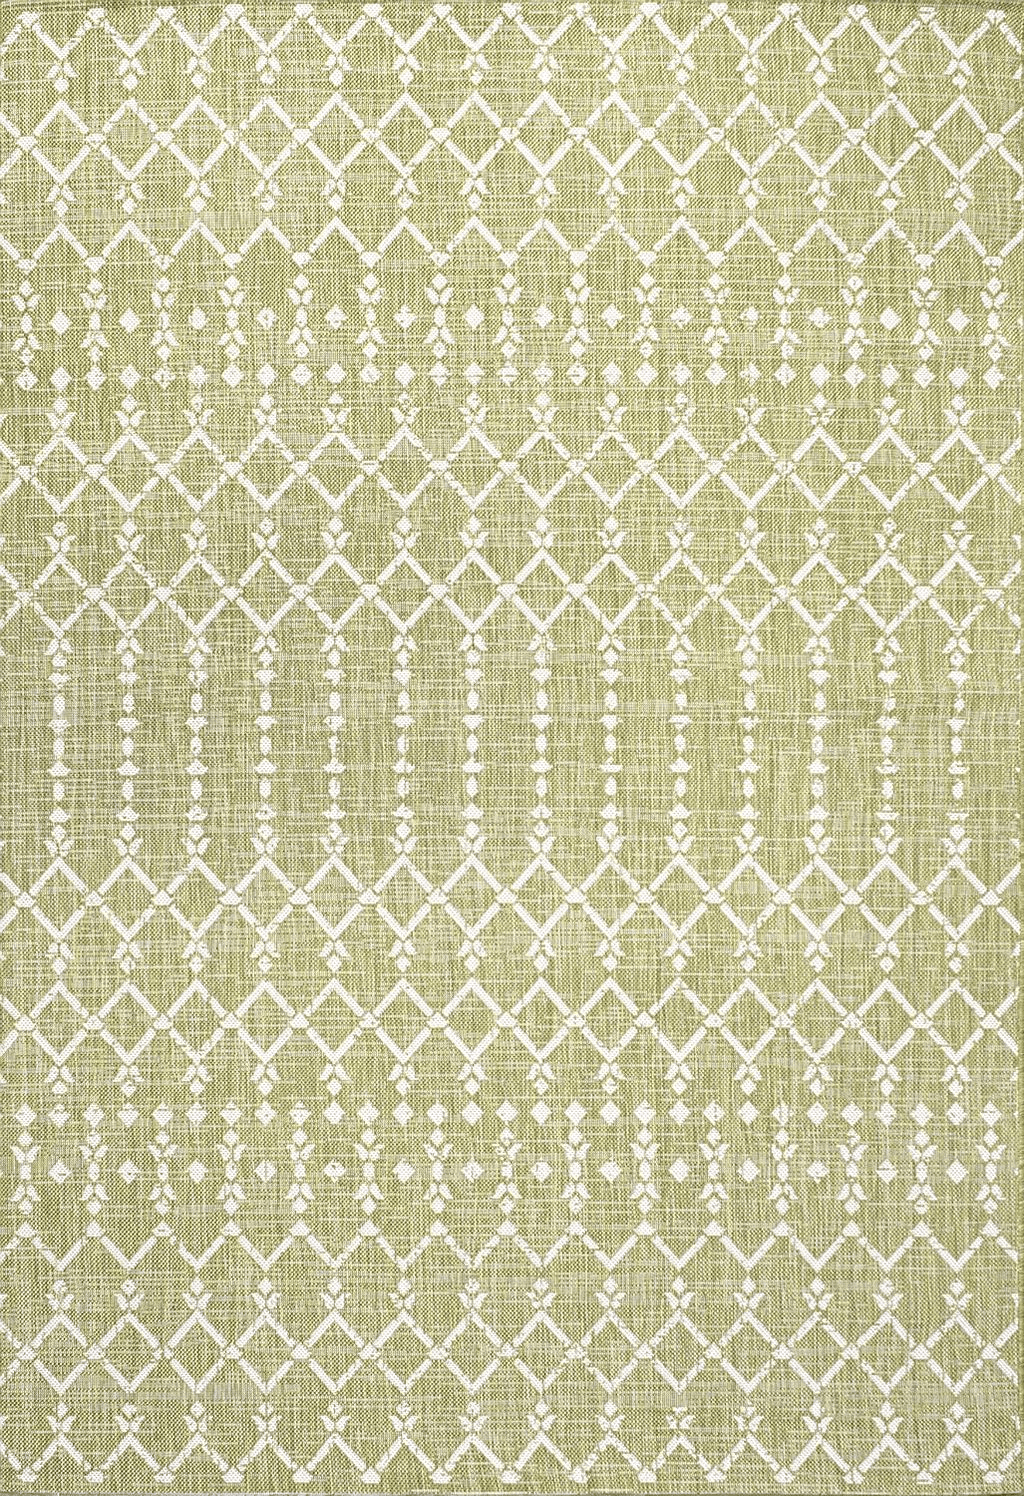 Eyely BMS108N-9 Santa Monica Ourika Moroccan Geometric Textured Weave Indoor/Outdoor Area Rug Rustic, Bedroom, Kitchen, Backyard, Patio, Easy-Cleaning, Non-Shedding, 9 X 12, Light Green/Cream